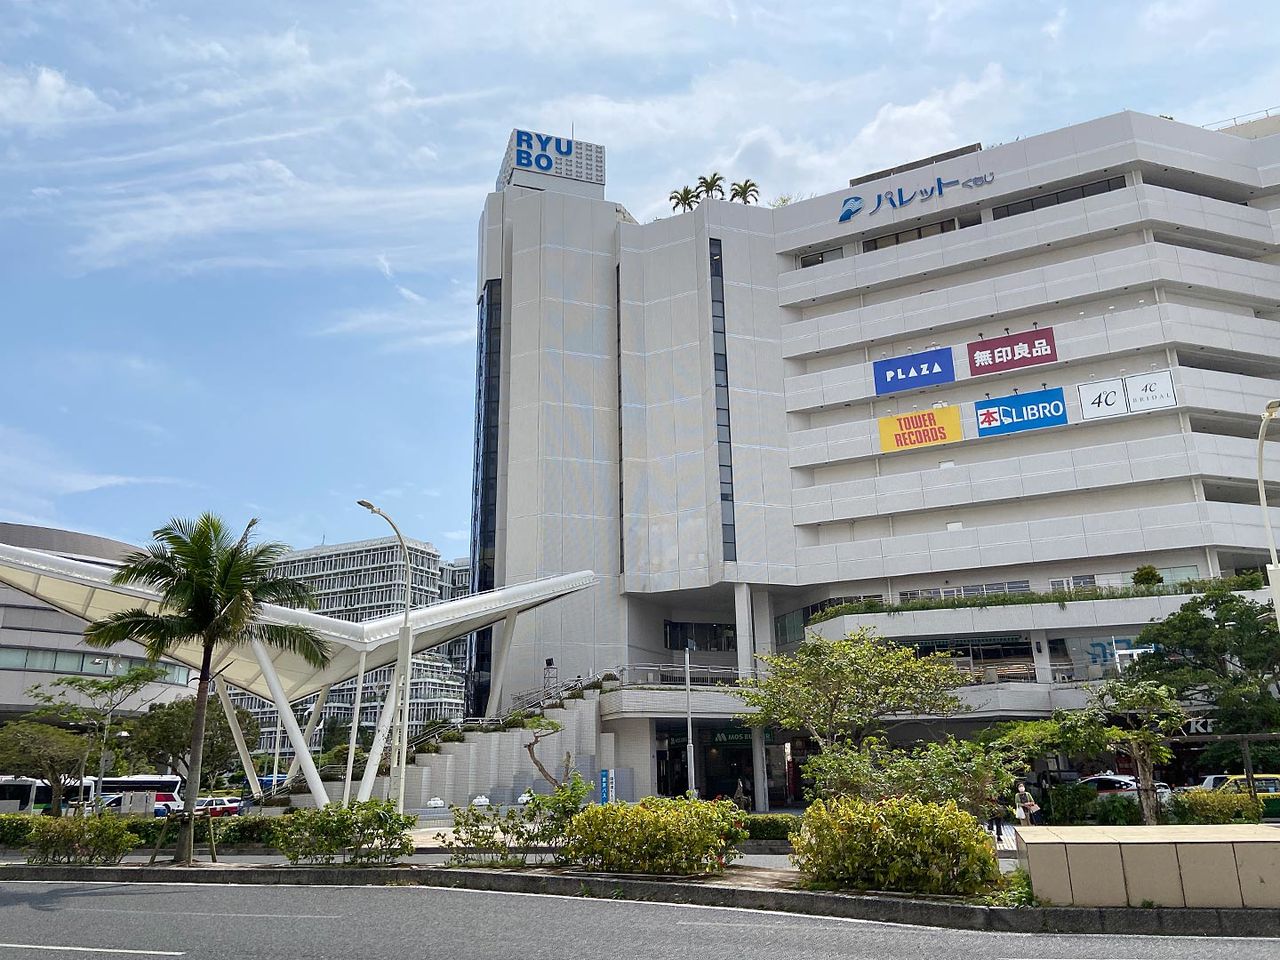 Ryūbō Department Store occupies a prime spot in central Naha, across from the Okinawa Prefectural Office and Naha City Hall.